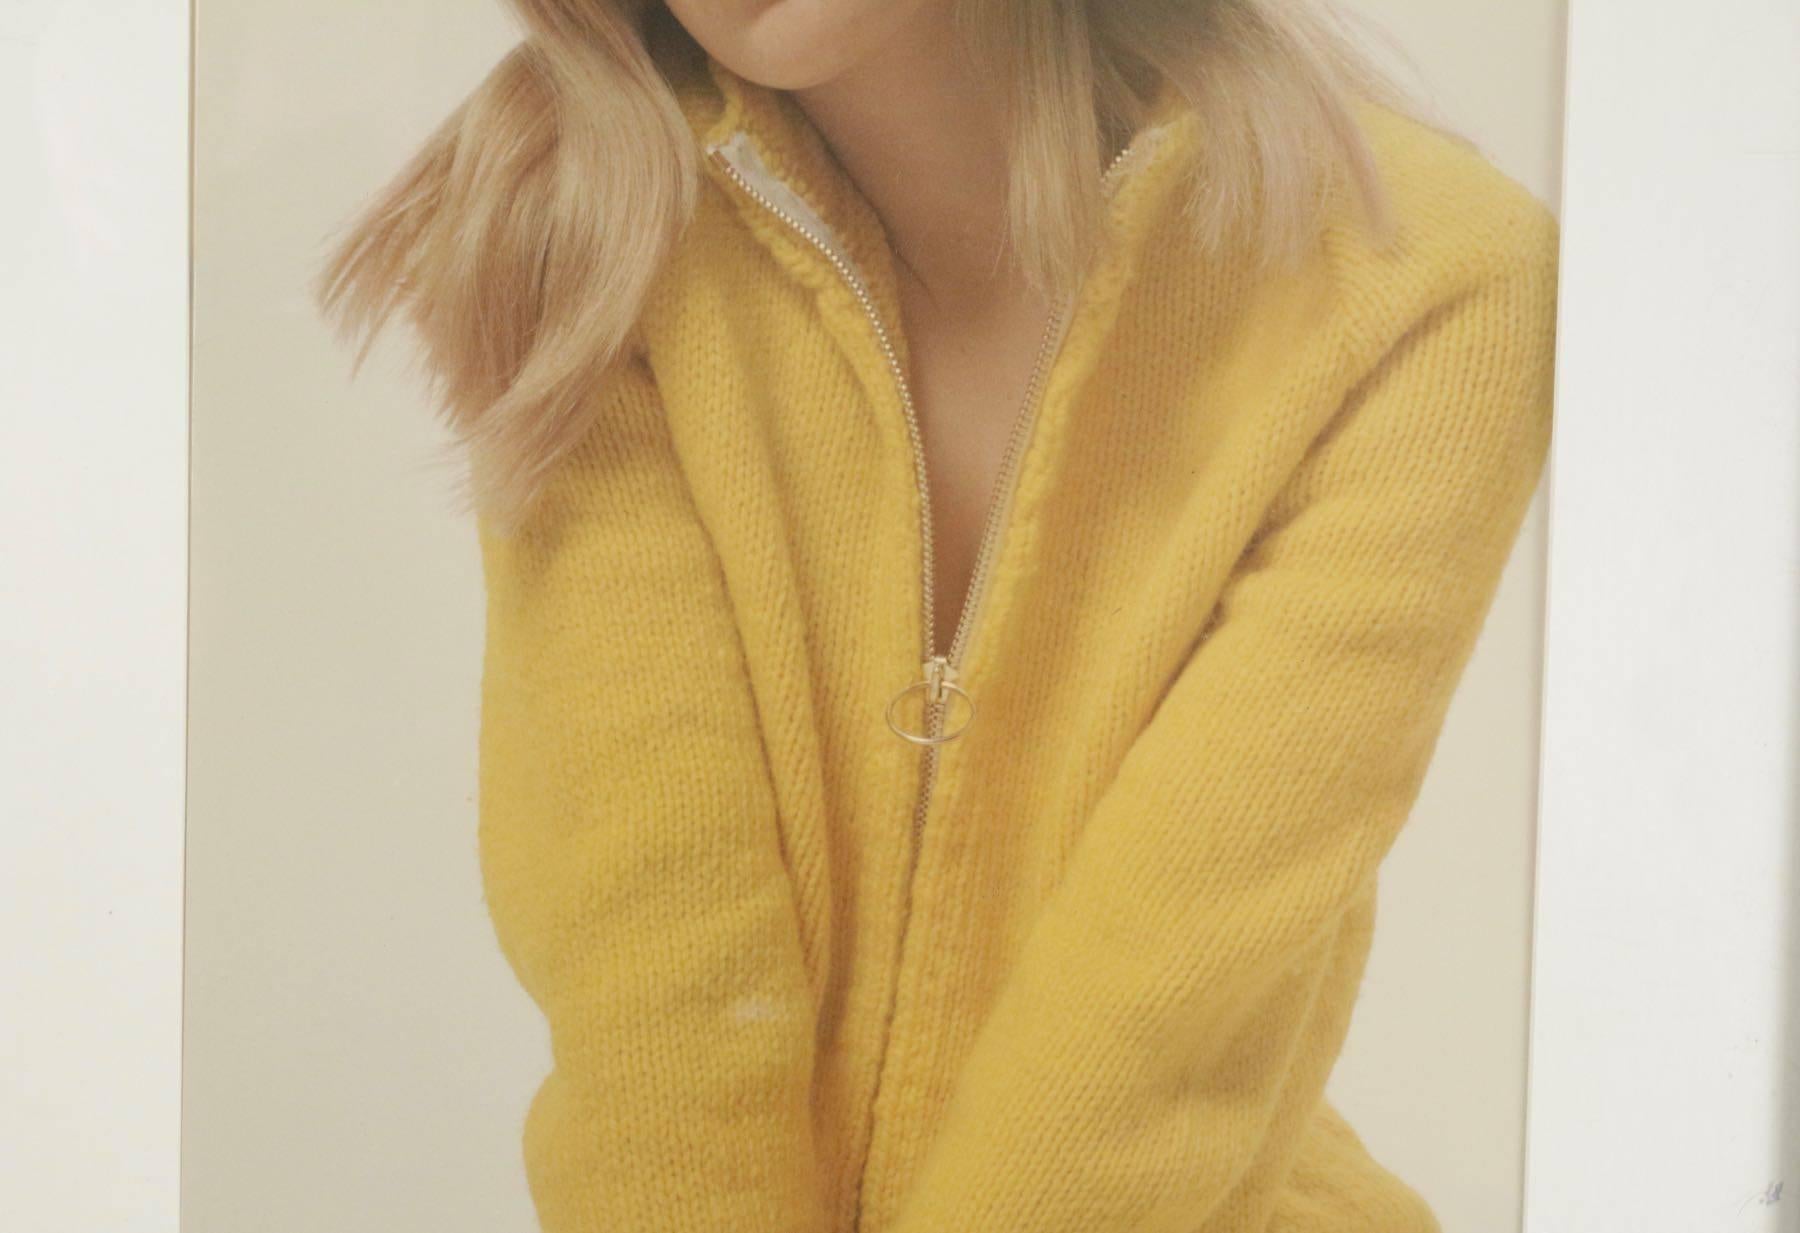 Original fashion photograph by photographer Robert Jean Chapuis, Paris, signed, representing a girl in a yellow sweater, circa 1970s.
Measures:
Without frame 49.5 cm x 35 cm,
with frame 68 cm x 54 cm.
  